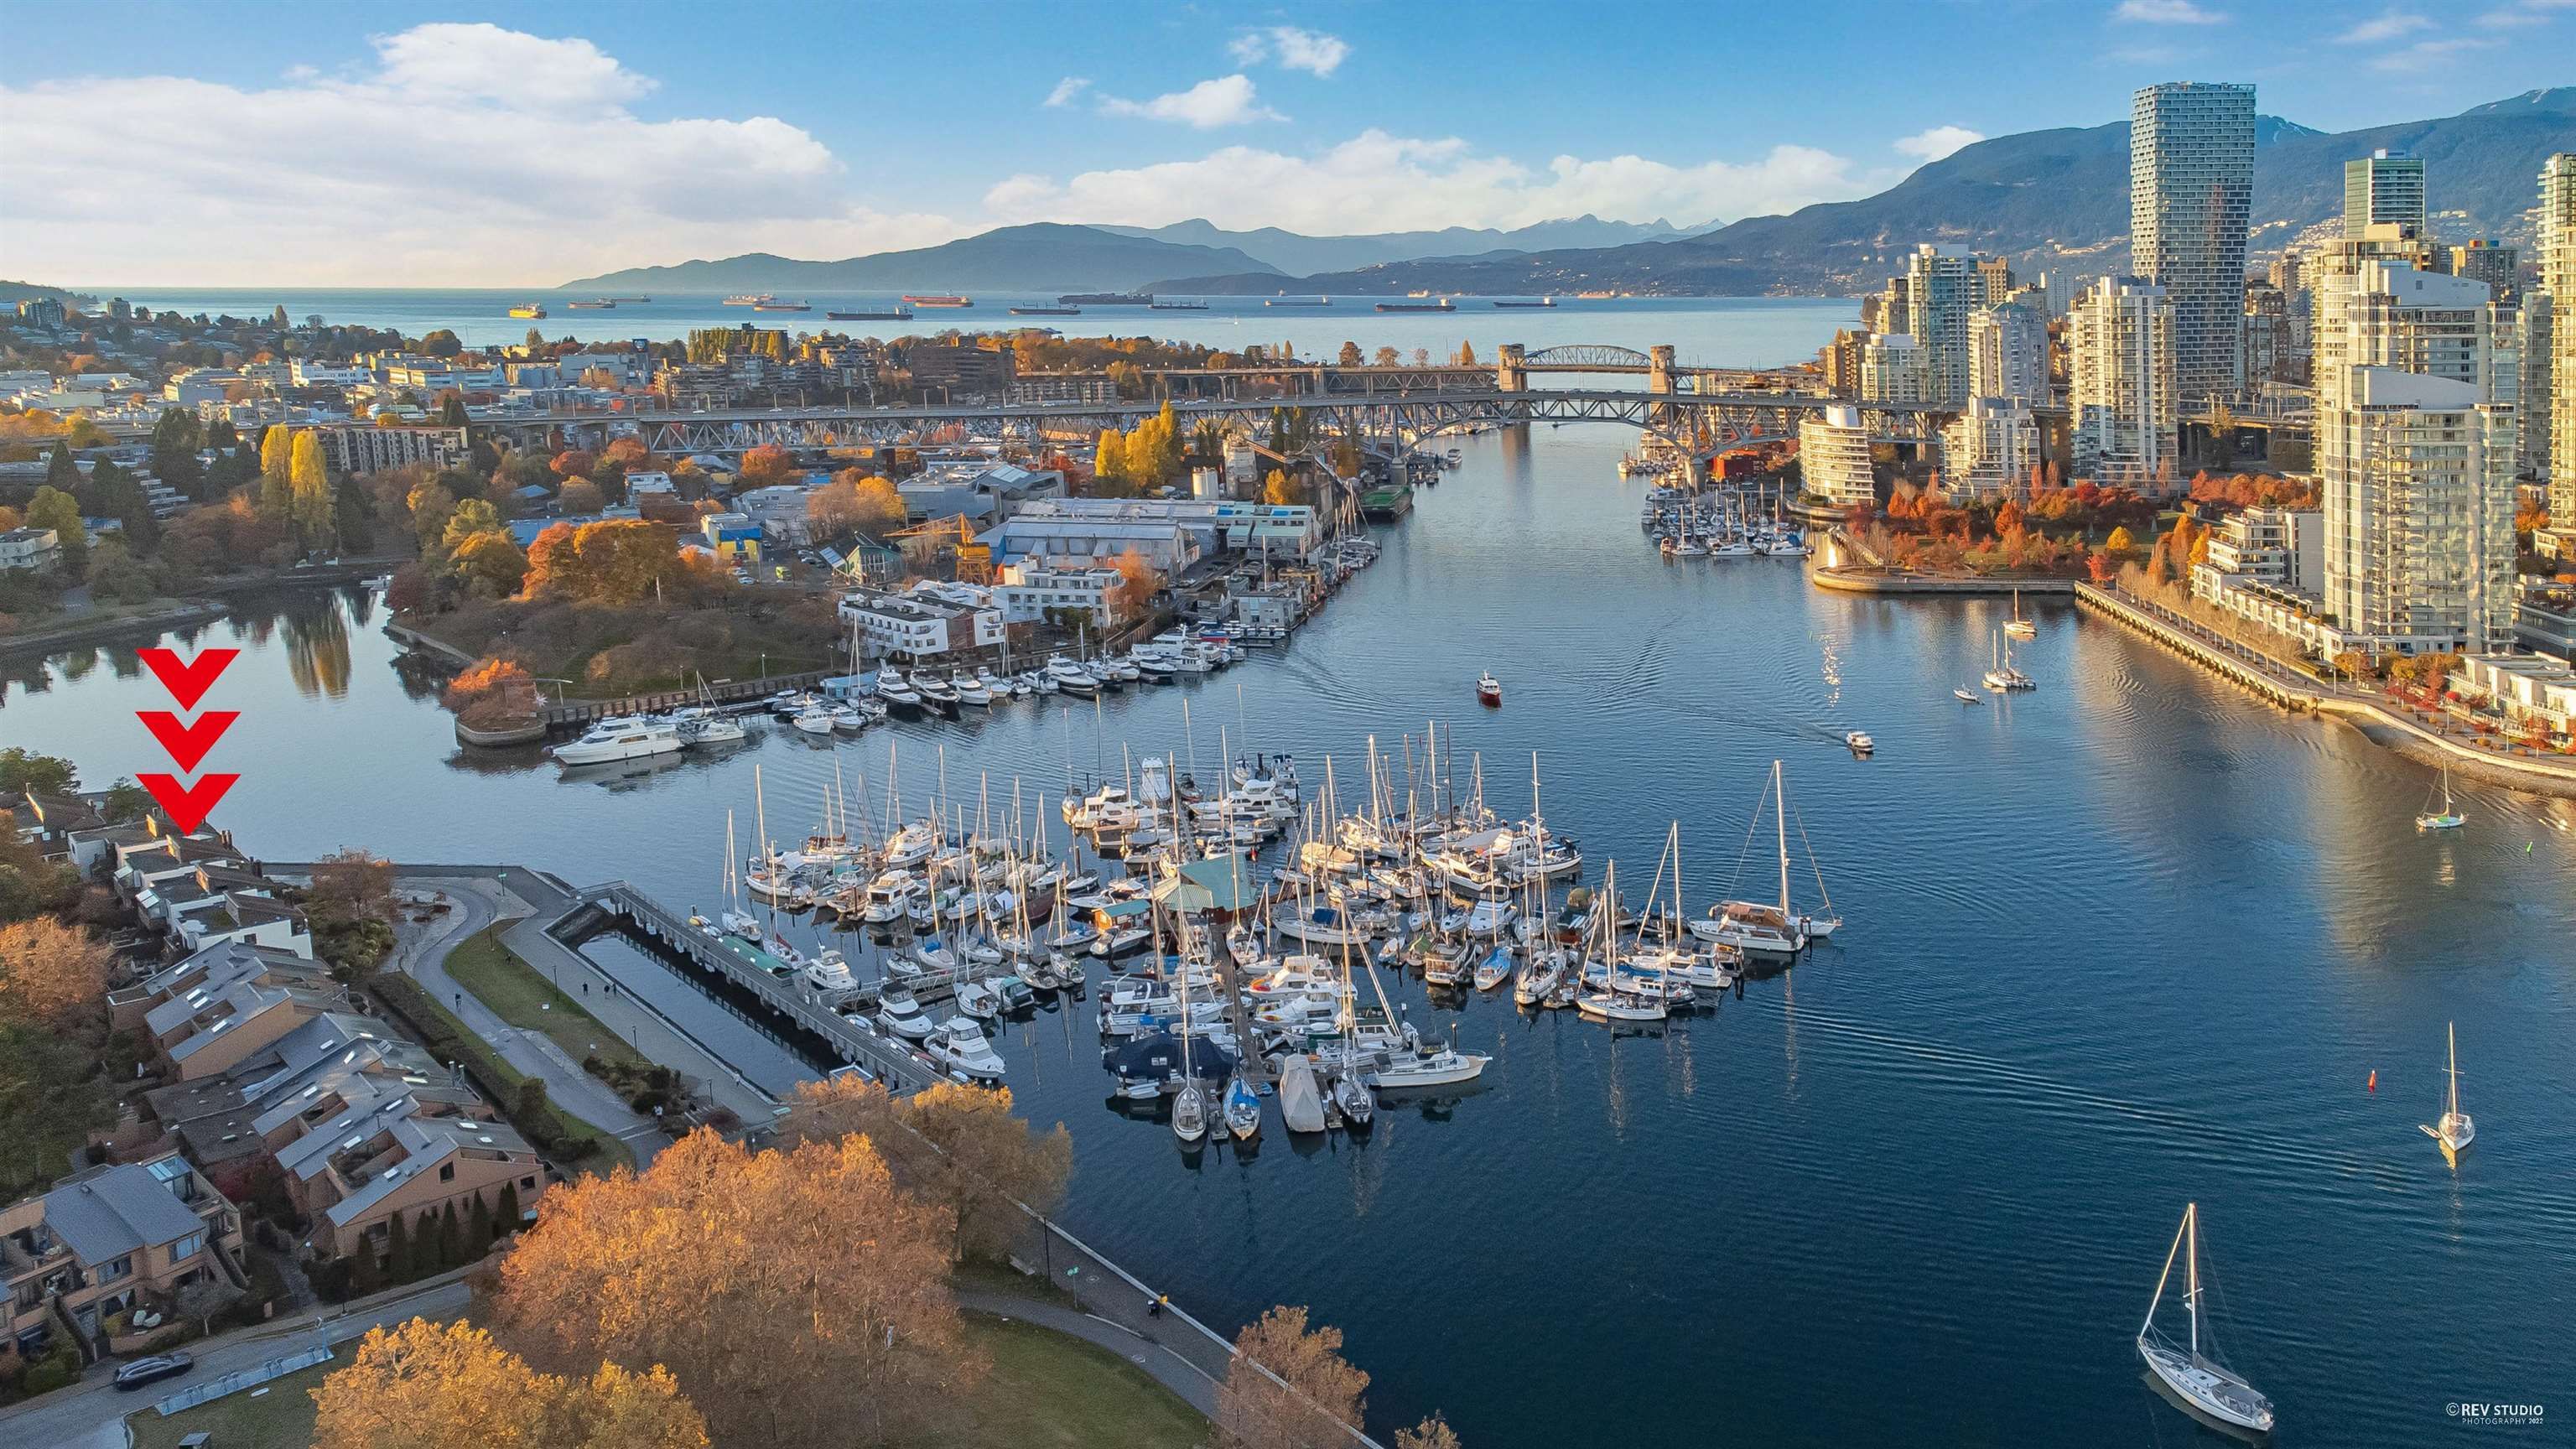 New property listed in False Creek, Vancouver West